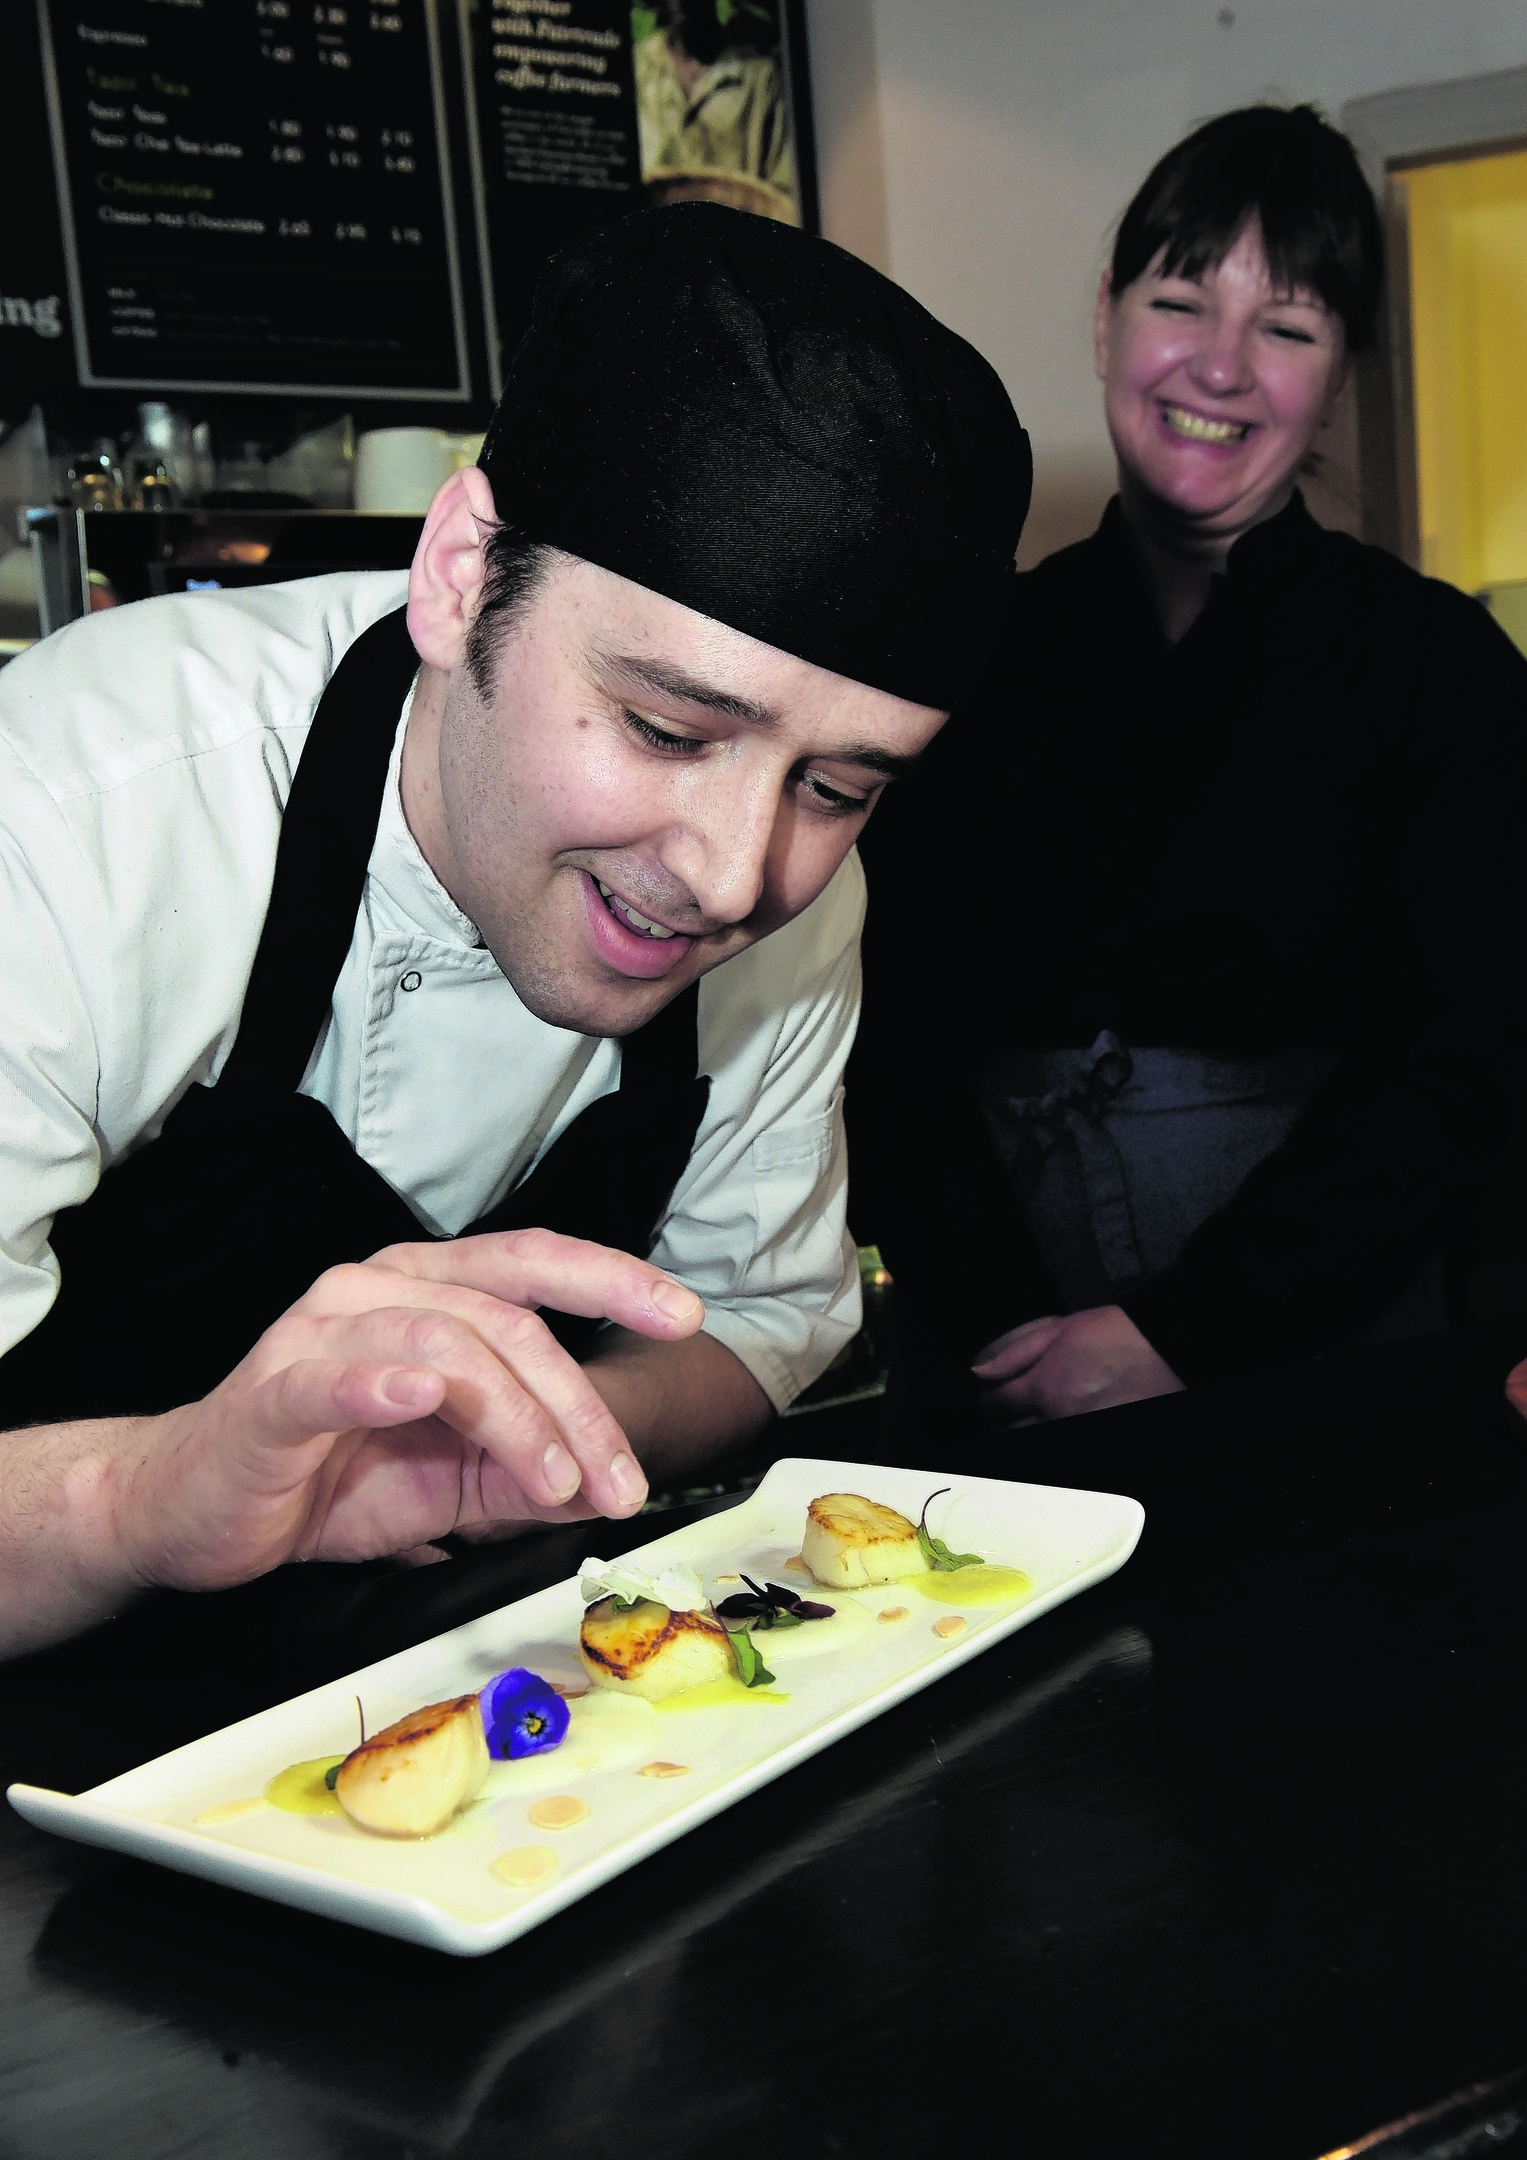 Restaurant reveiw - The Porterhouse Restaurant - Thainstone Centre, Inverurie. Chef Greig Rose prepares the Saint-Jacques Scallops served with a celery veloute scuce, pineapple foam and toasted flaked almonds. Waitress Trudi Munro in the background. Picture by COLIN RENNIE April 19, 2016.